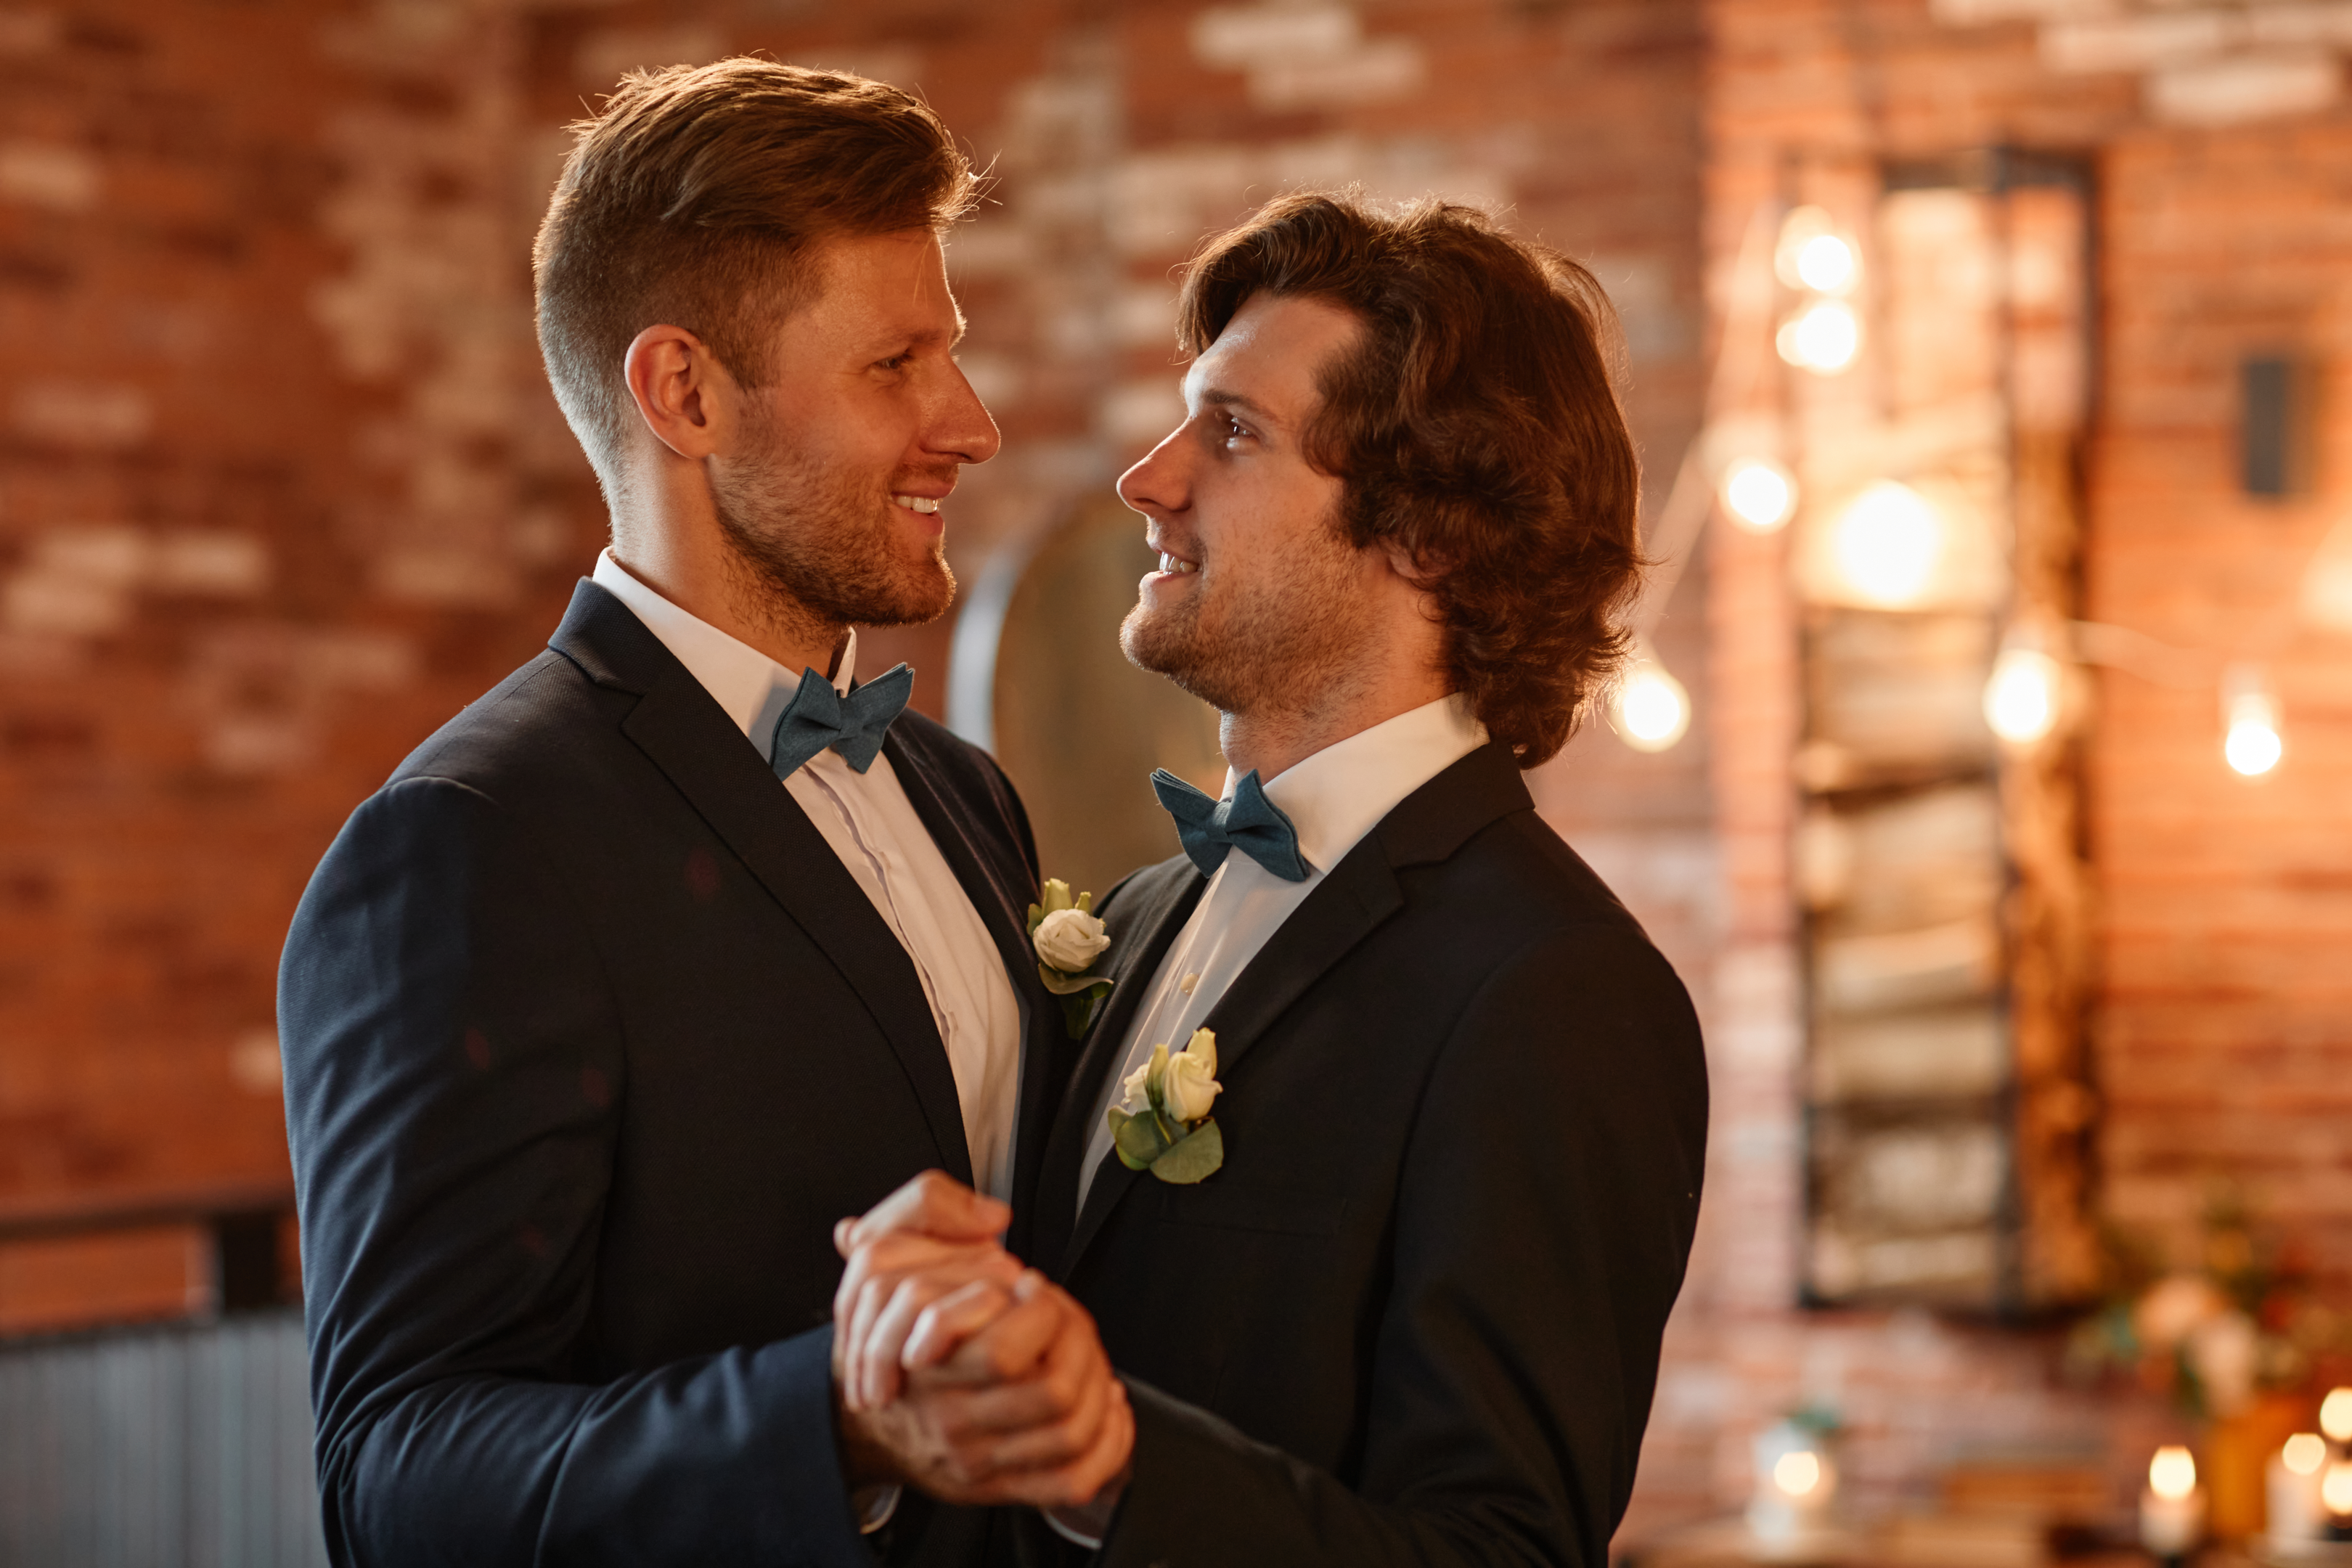 "Same-sex couple celebrating their union, emphasizing the importance of setting up wills and trusts to protect their future together."